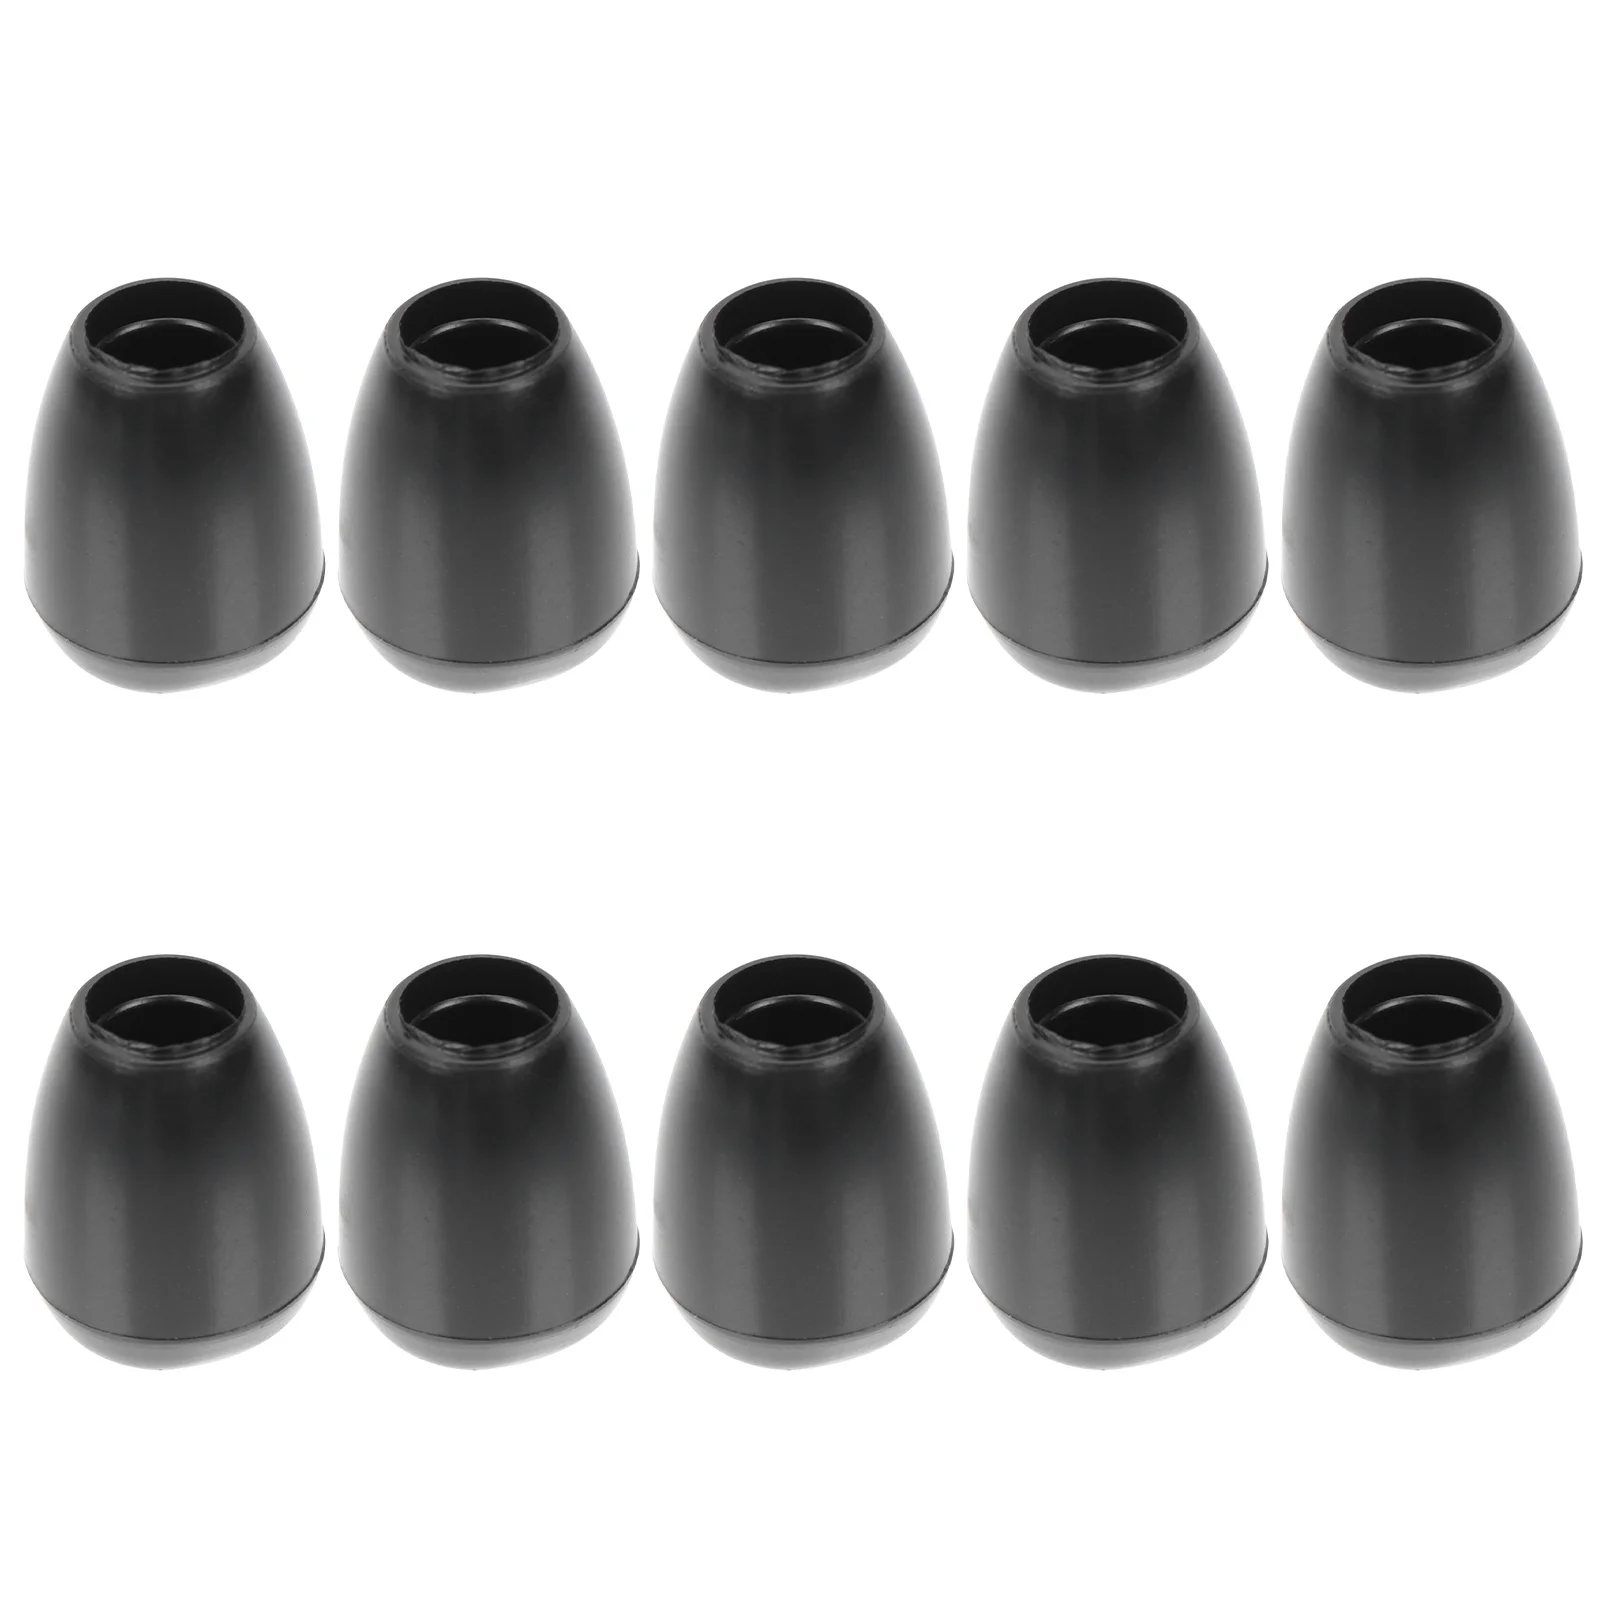 

10 Pairs Stethoscope Earplugs Headphone Accessories Echoscope Replacement Earbud Tips Stethoscopes Silica Gel Silicone